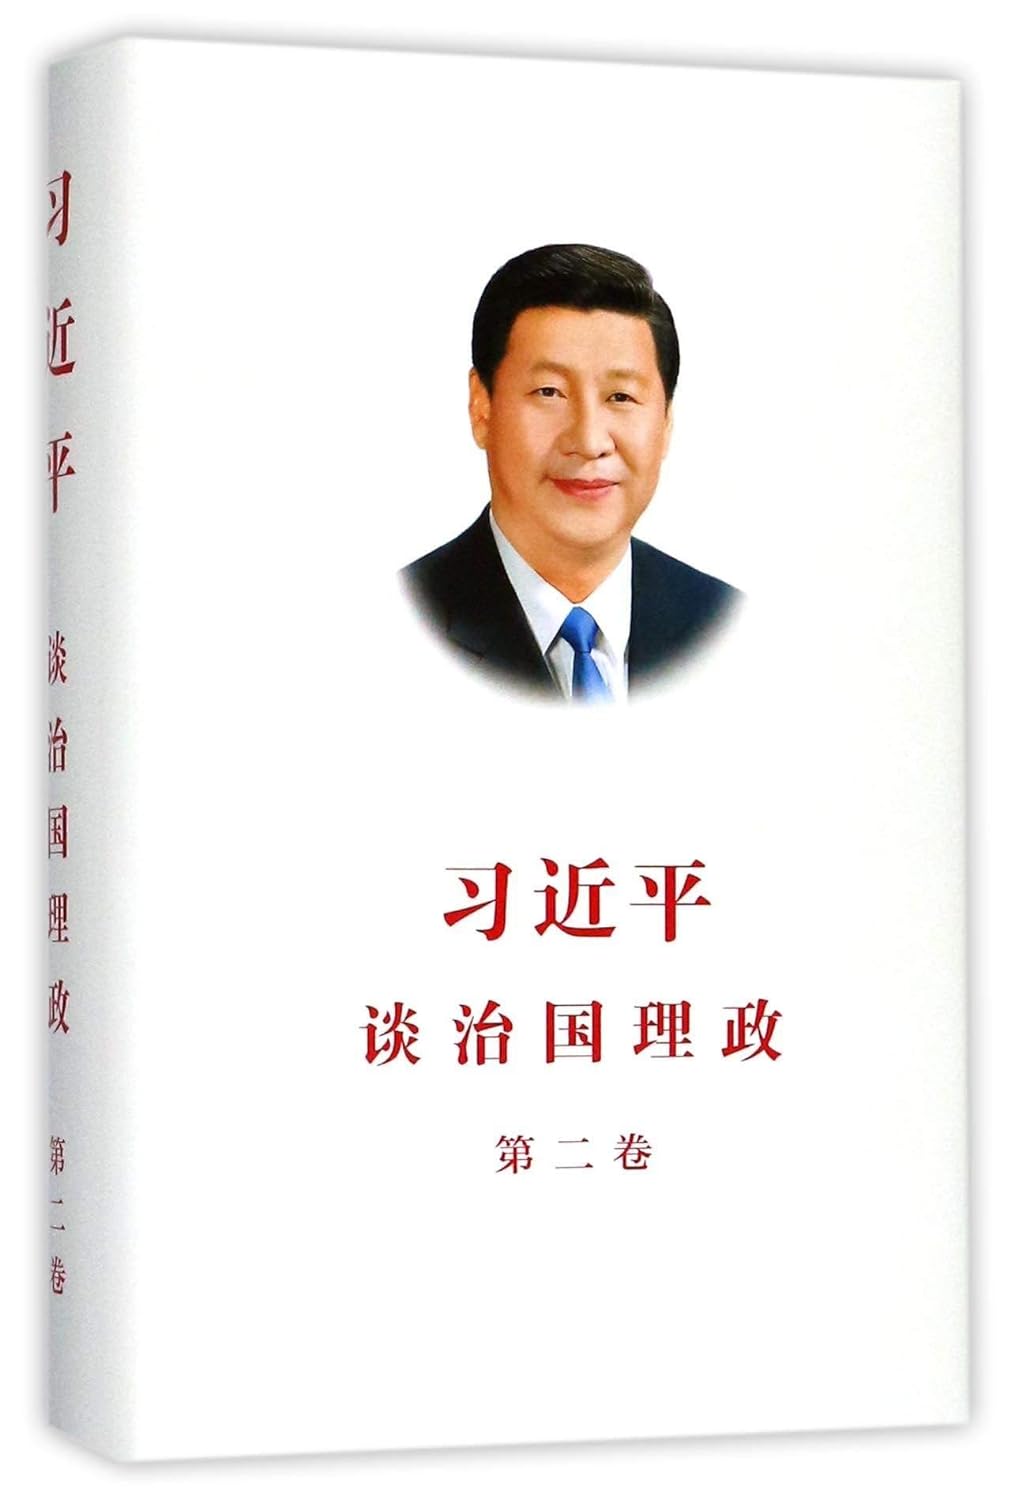 Xi Jinping: The Governance of China Vol. 2 (Chinese) - Hardcover